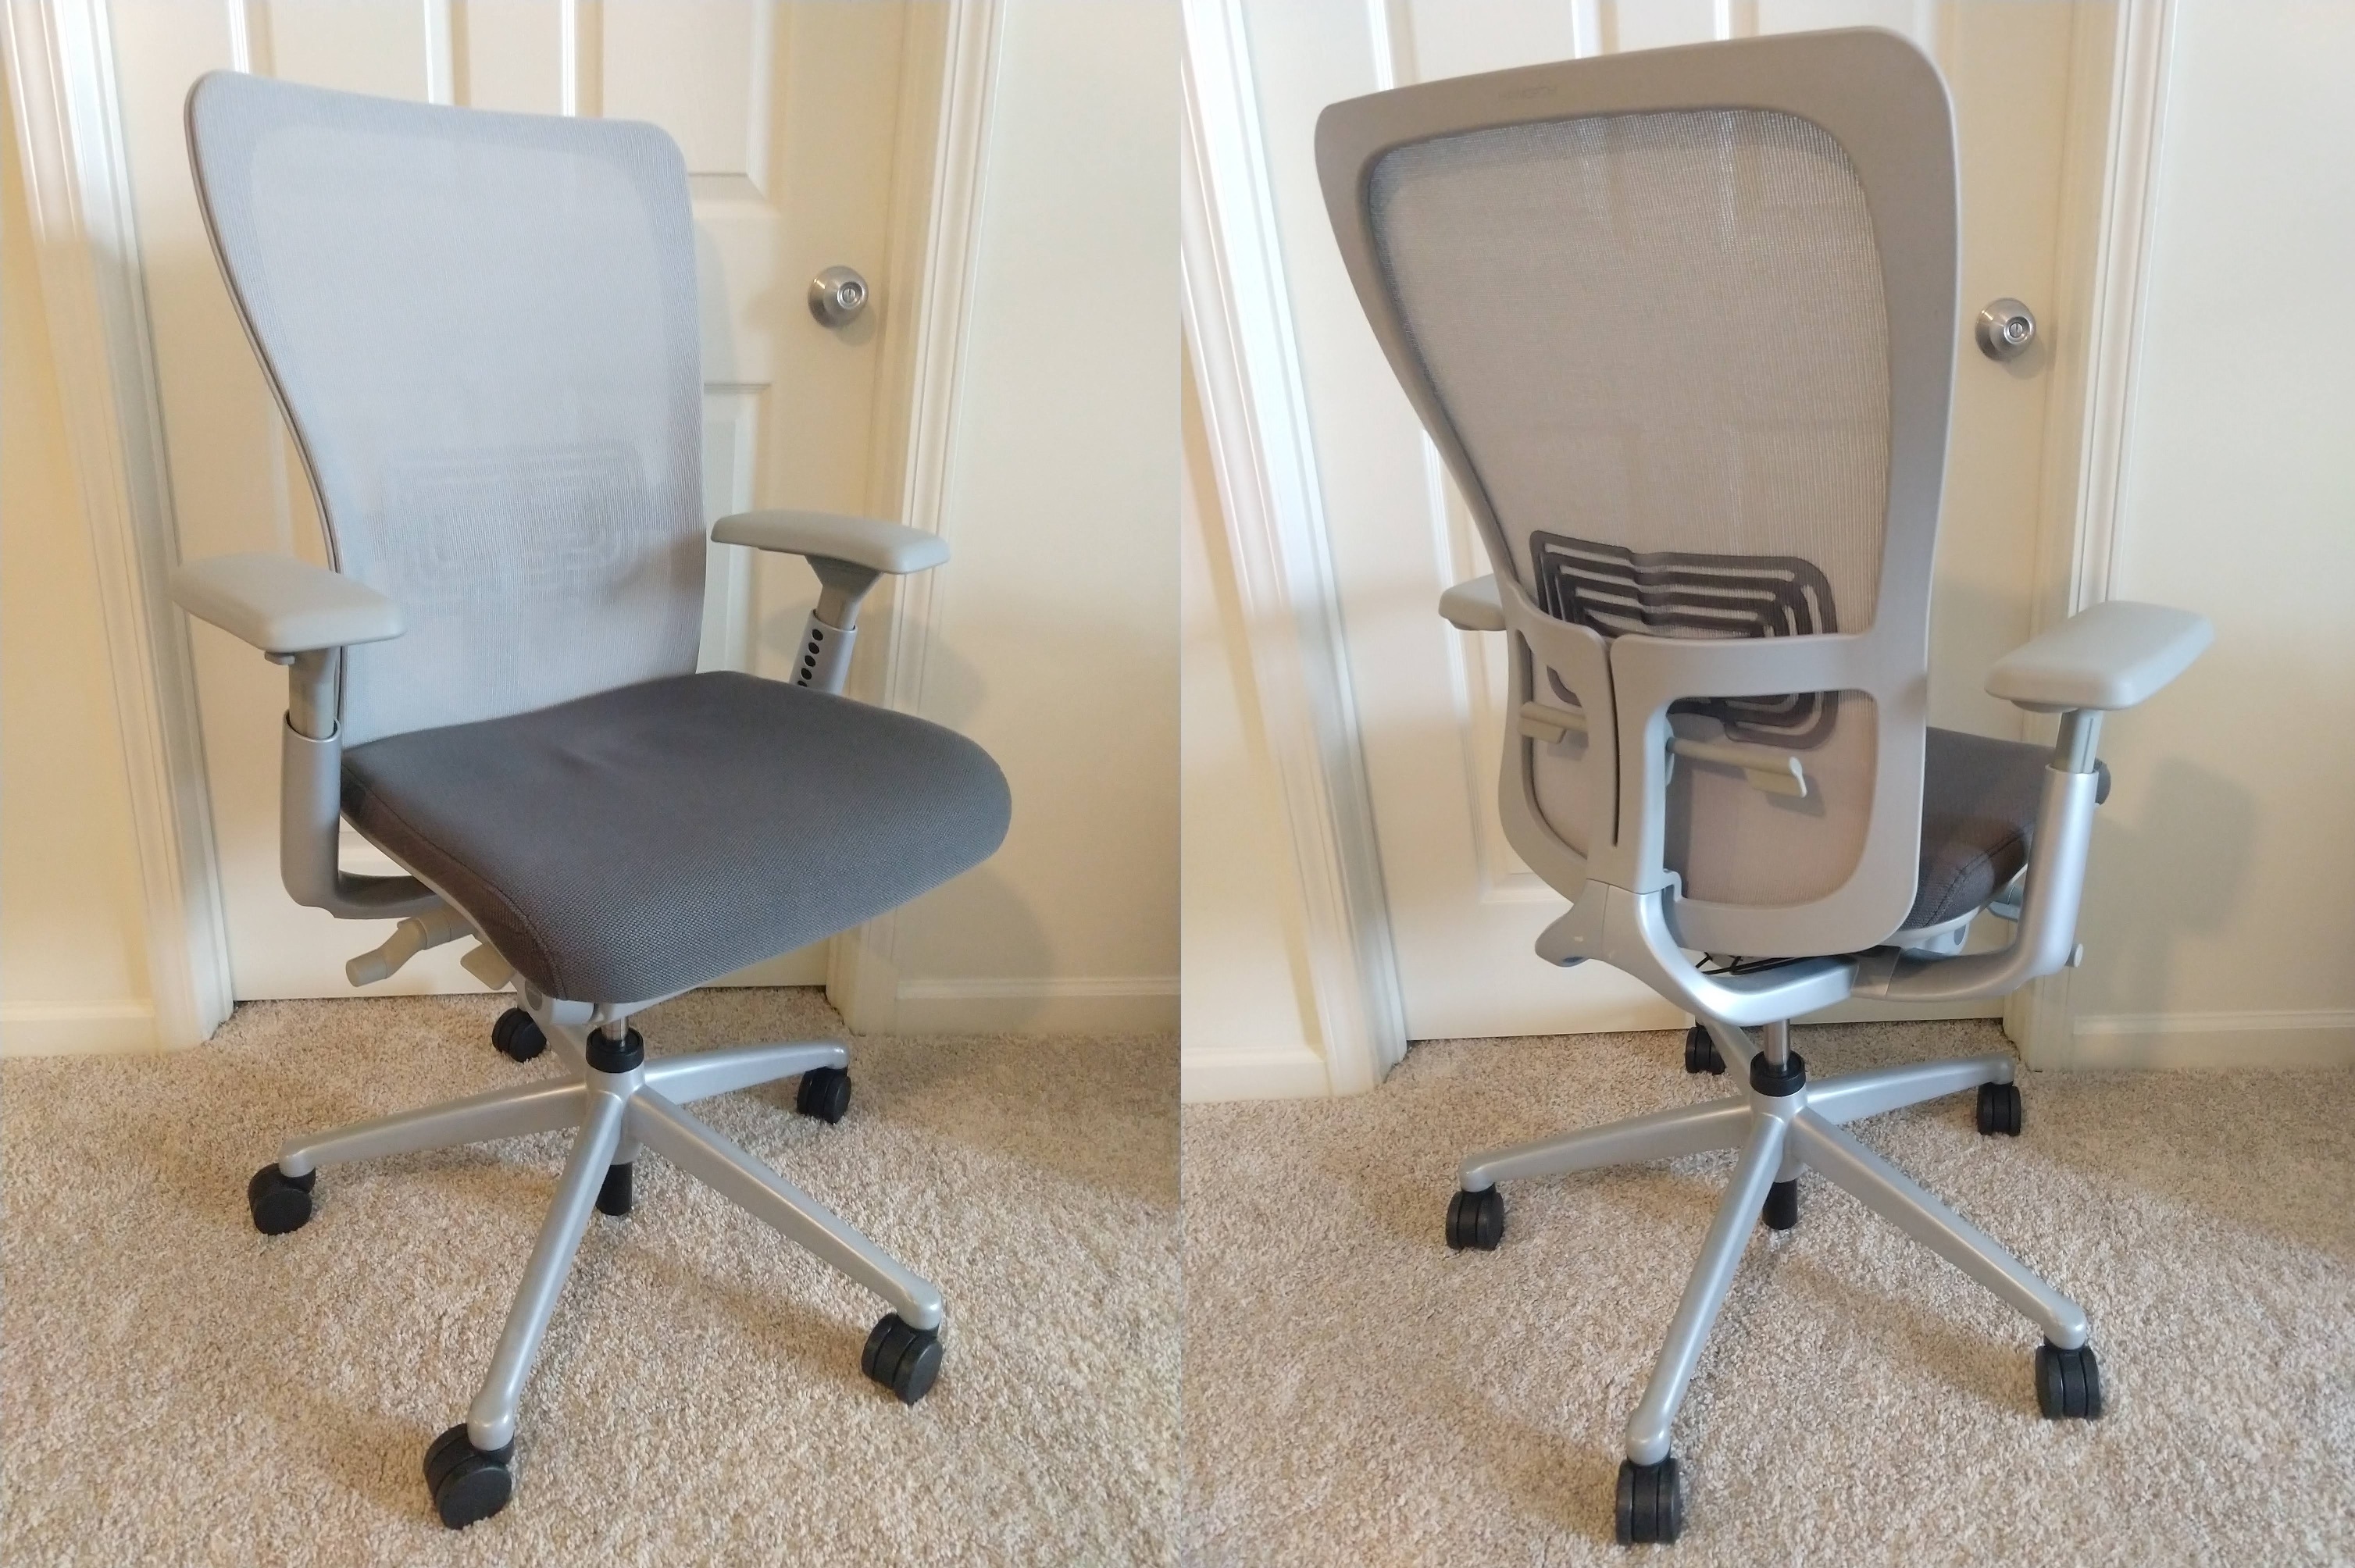 Two photos of a grey computer chair from different angles.